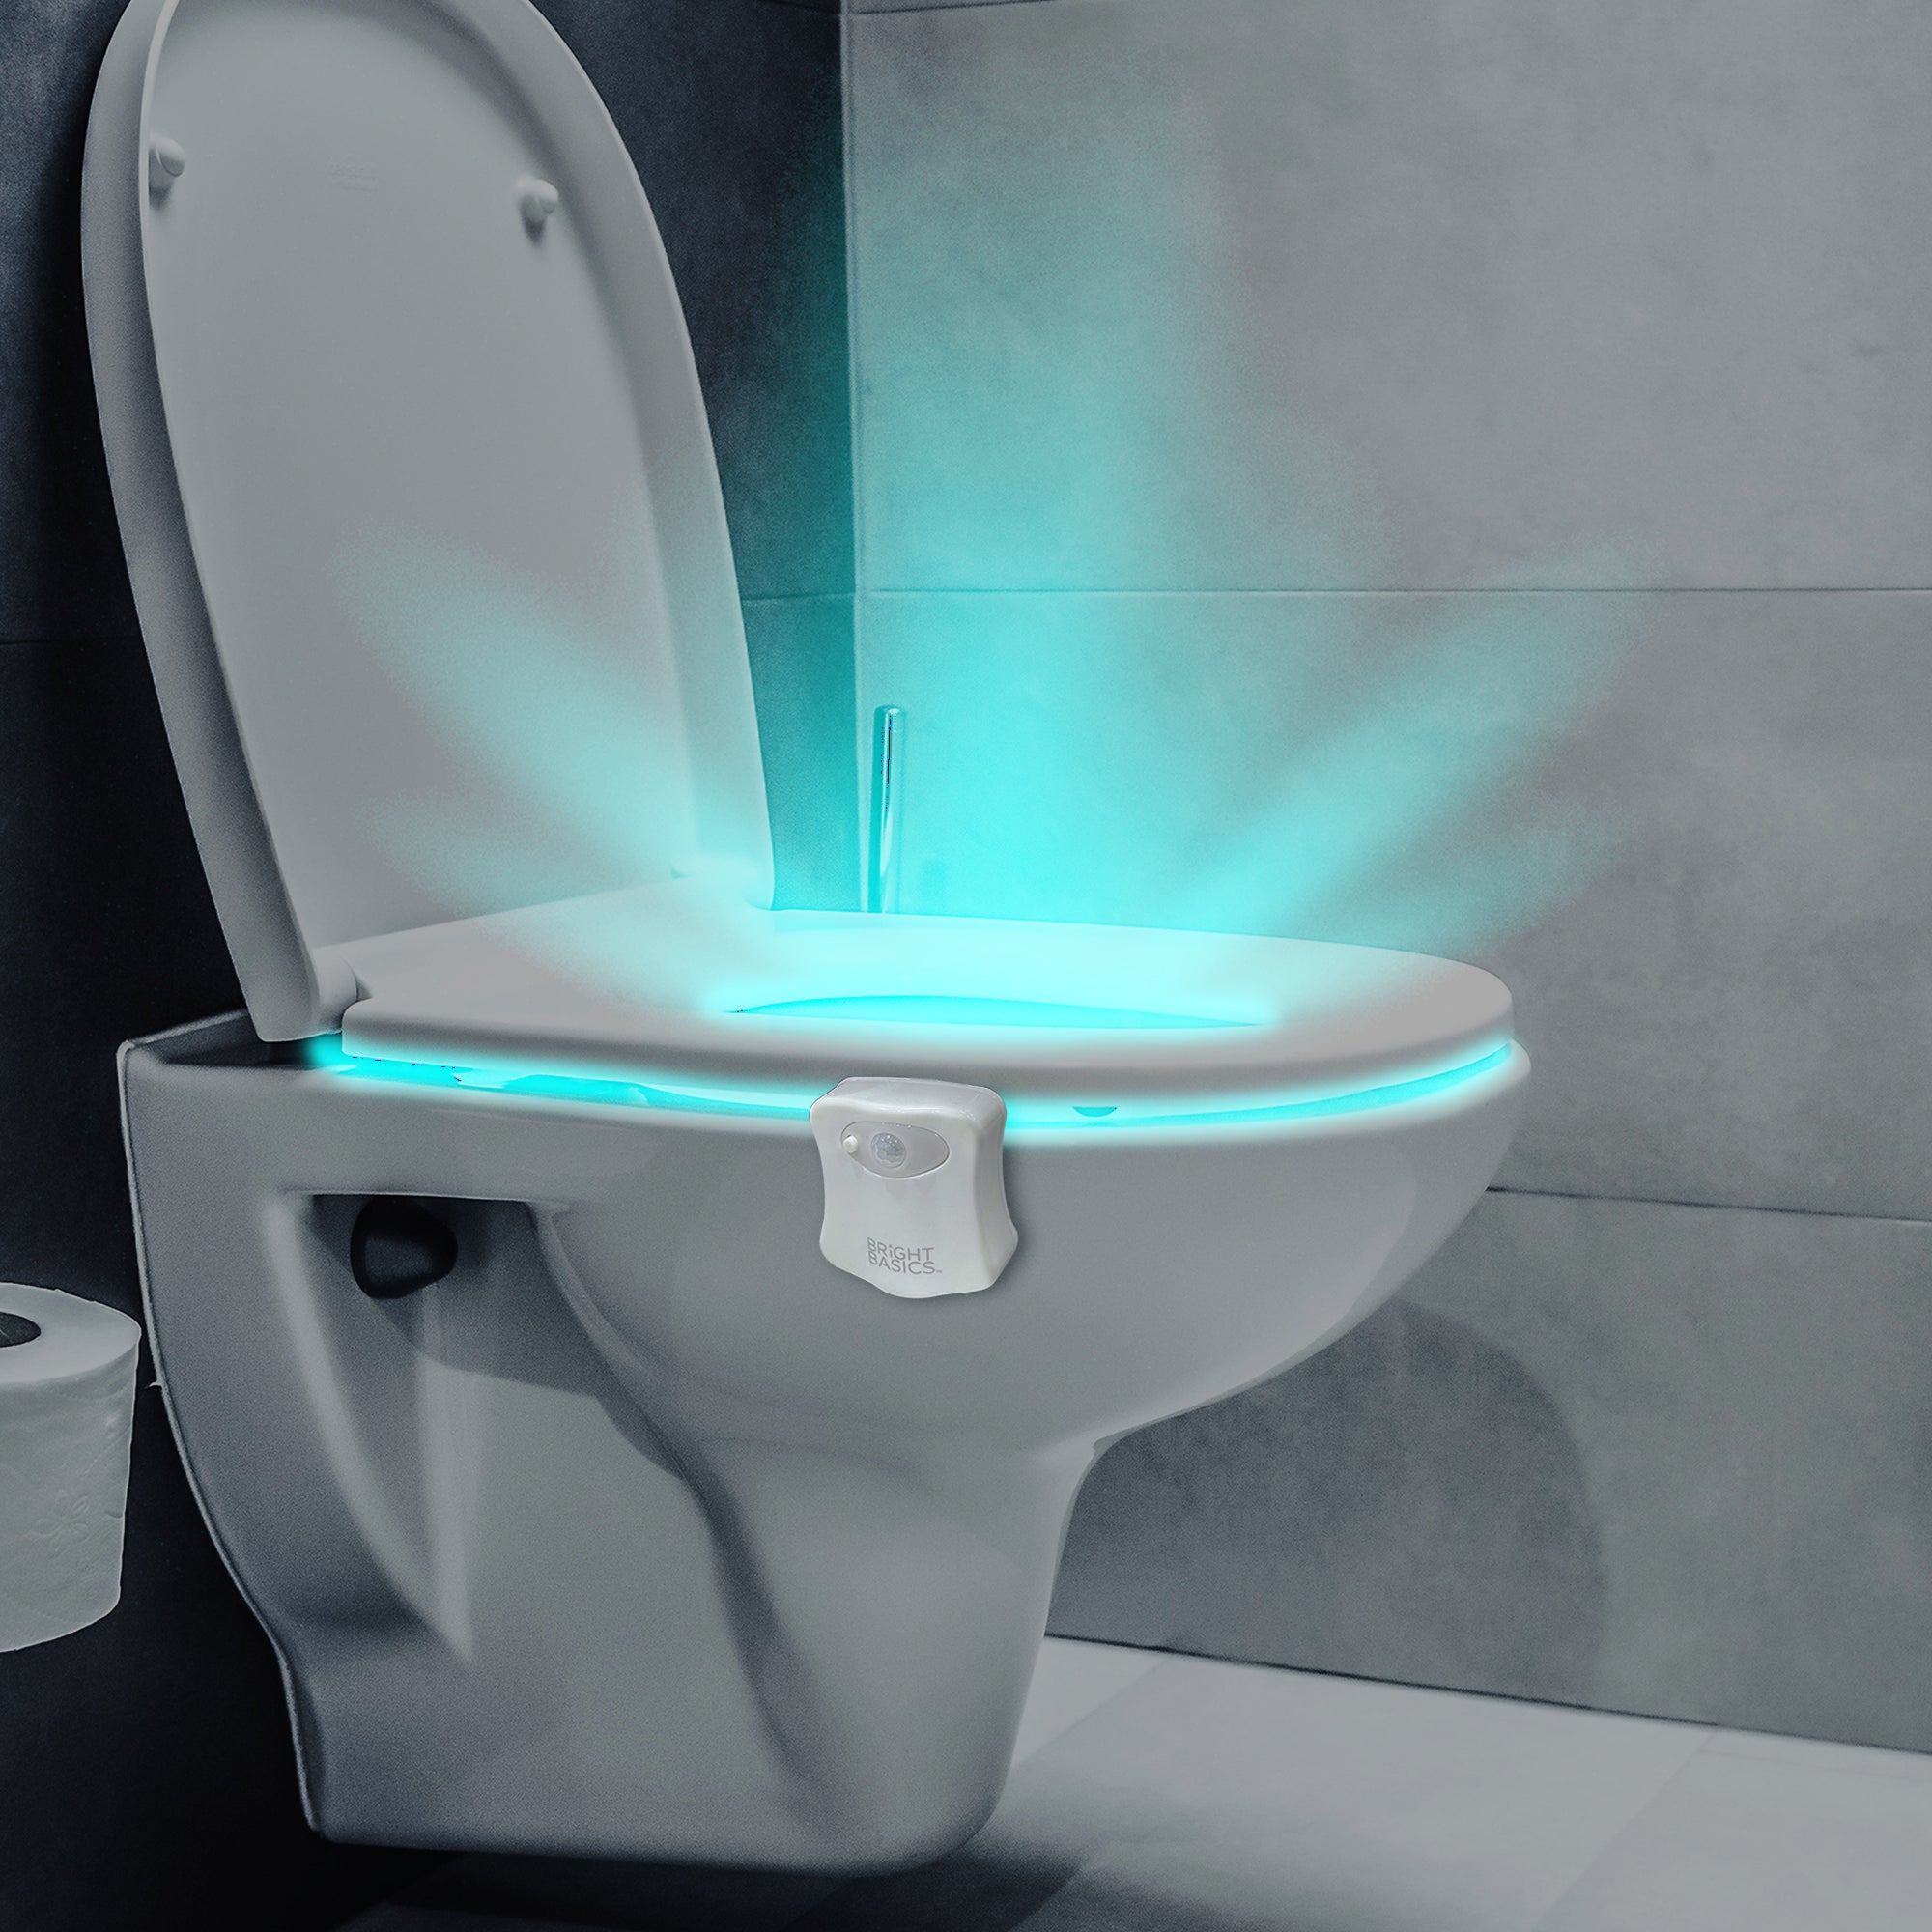 Find your best offer here Bright Basics Motion Activated Toilet